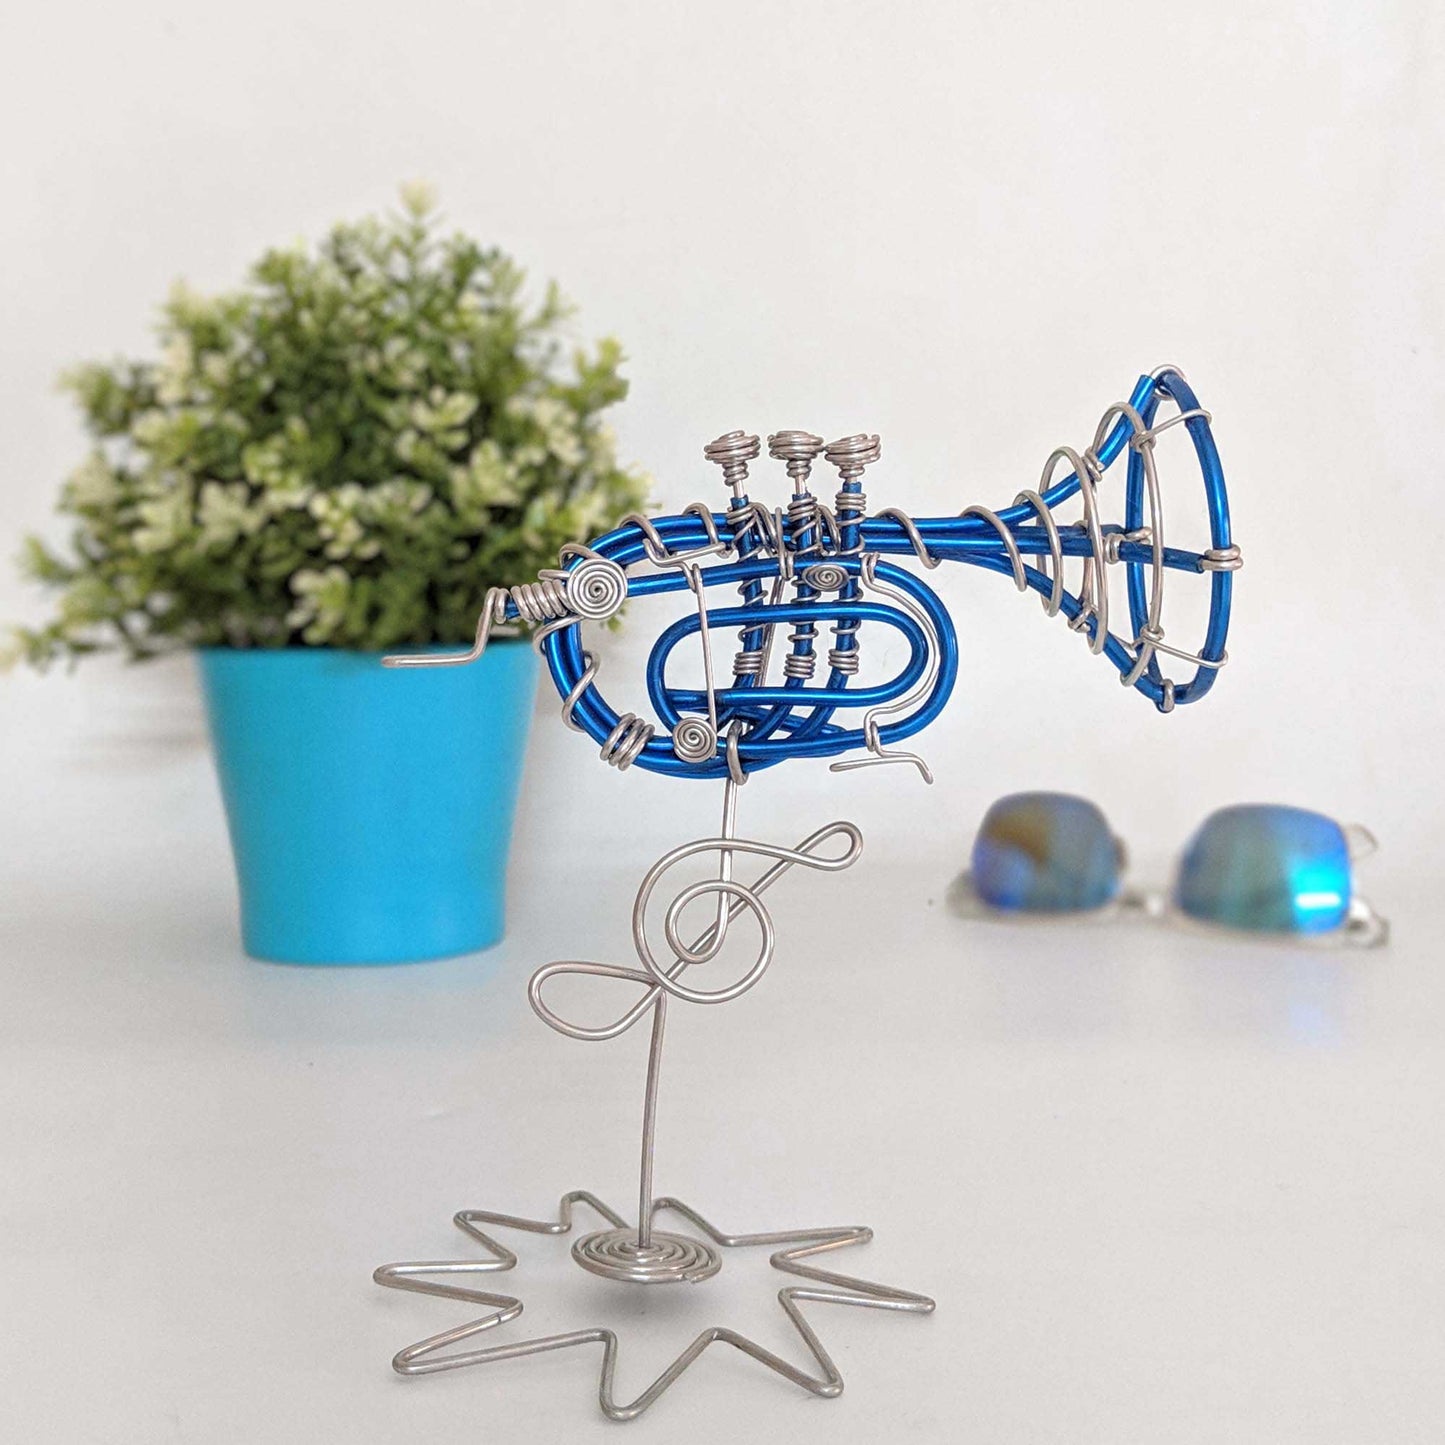 Miniature Wire Art Trumpet hand-crafted from aluminium wire